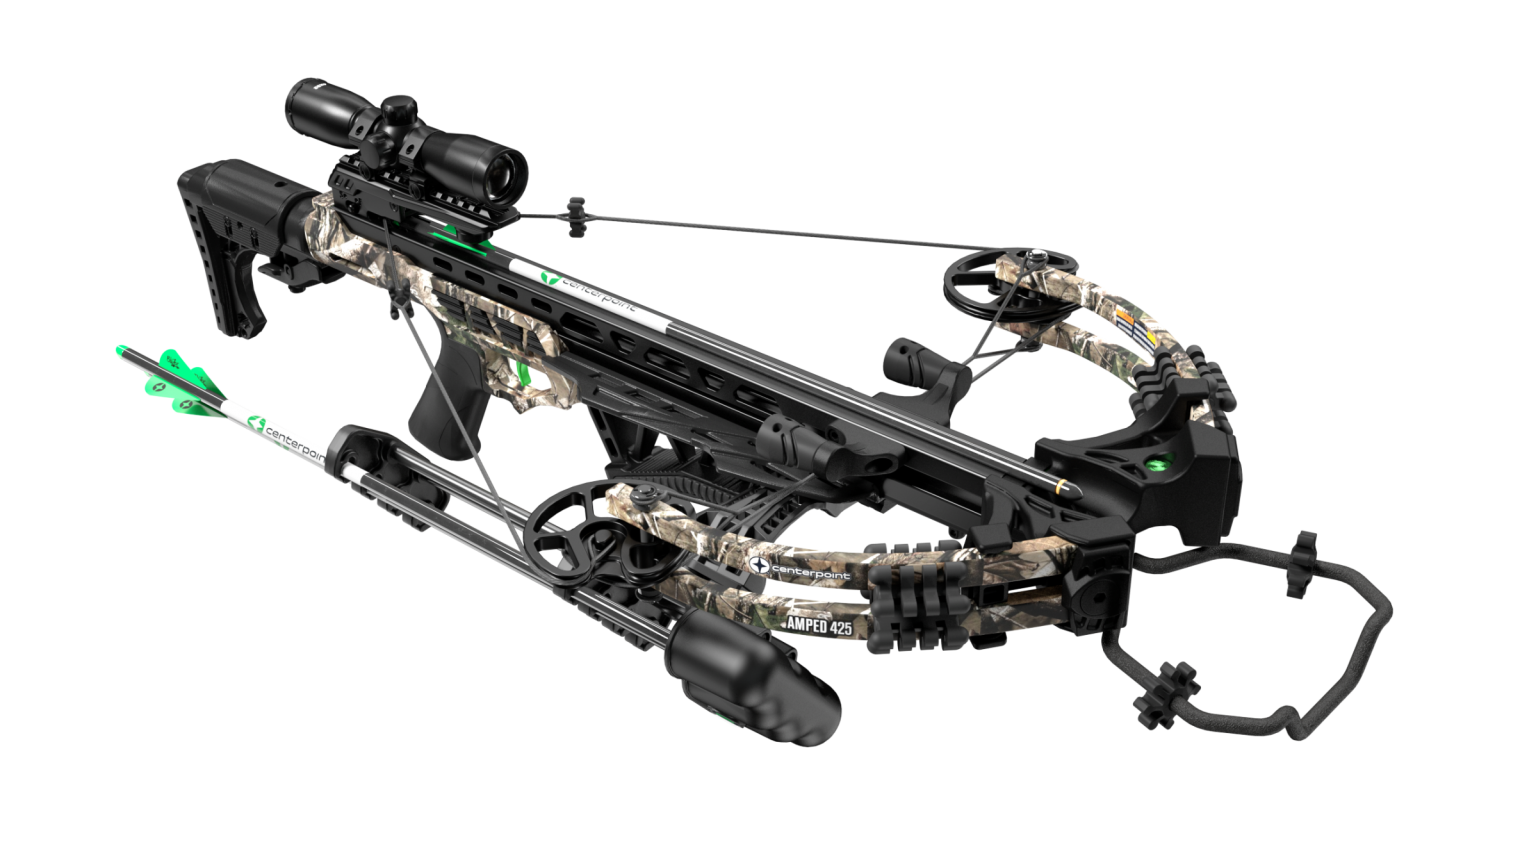 photo4less-centerpoint-amped-425-compound-crossbow-package-camo